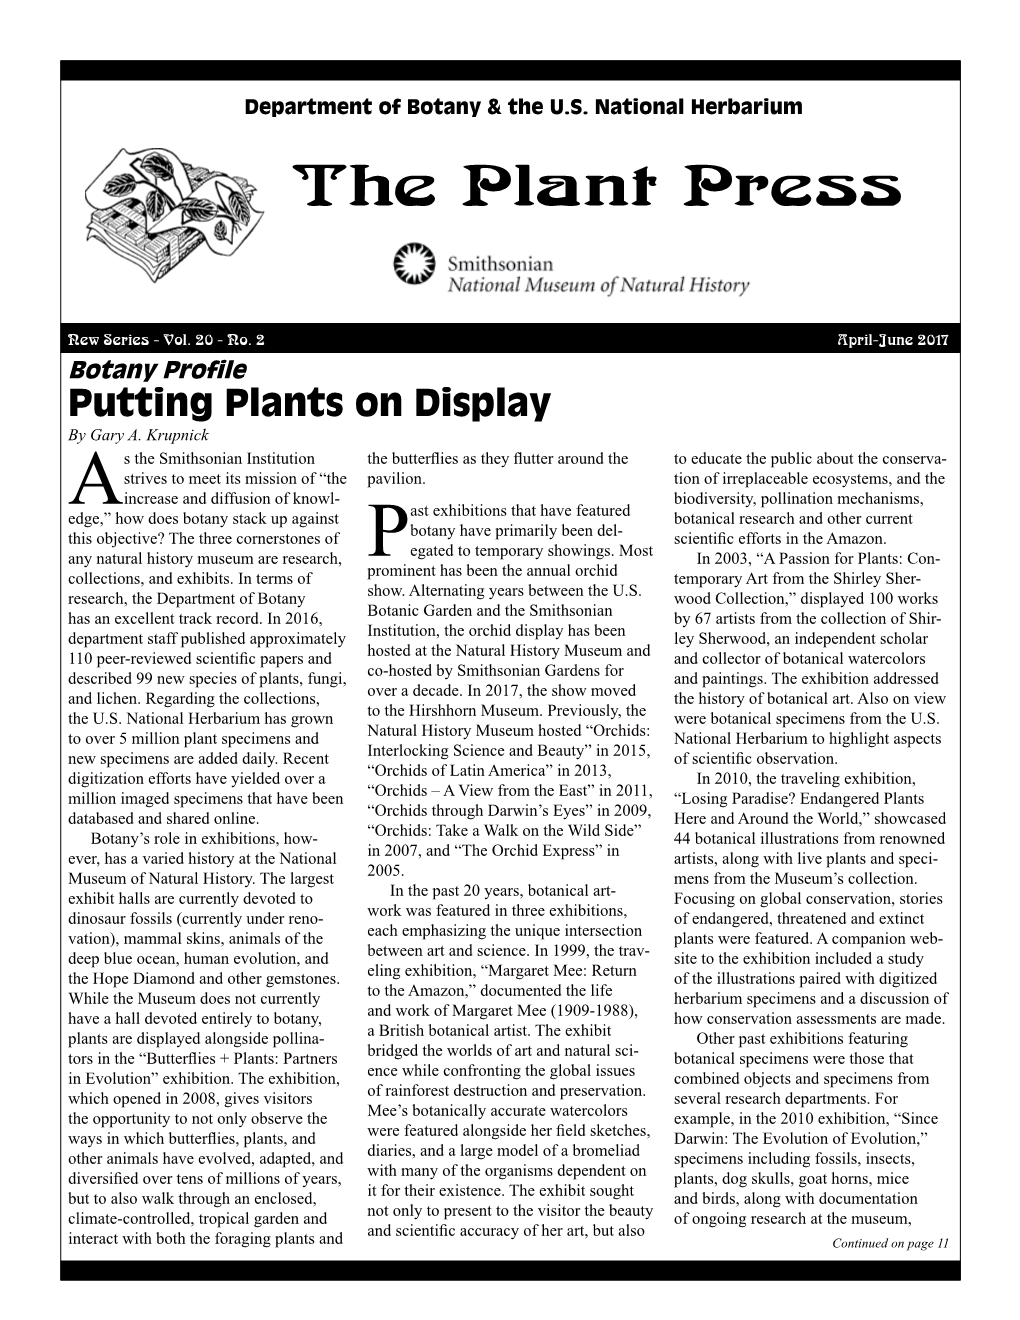 Putting Plants on Display by Gary A